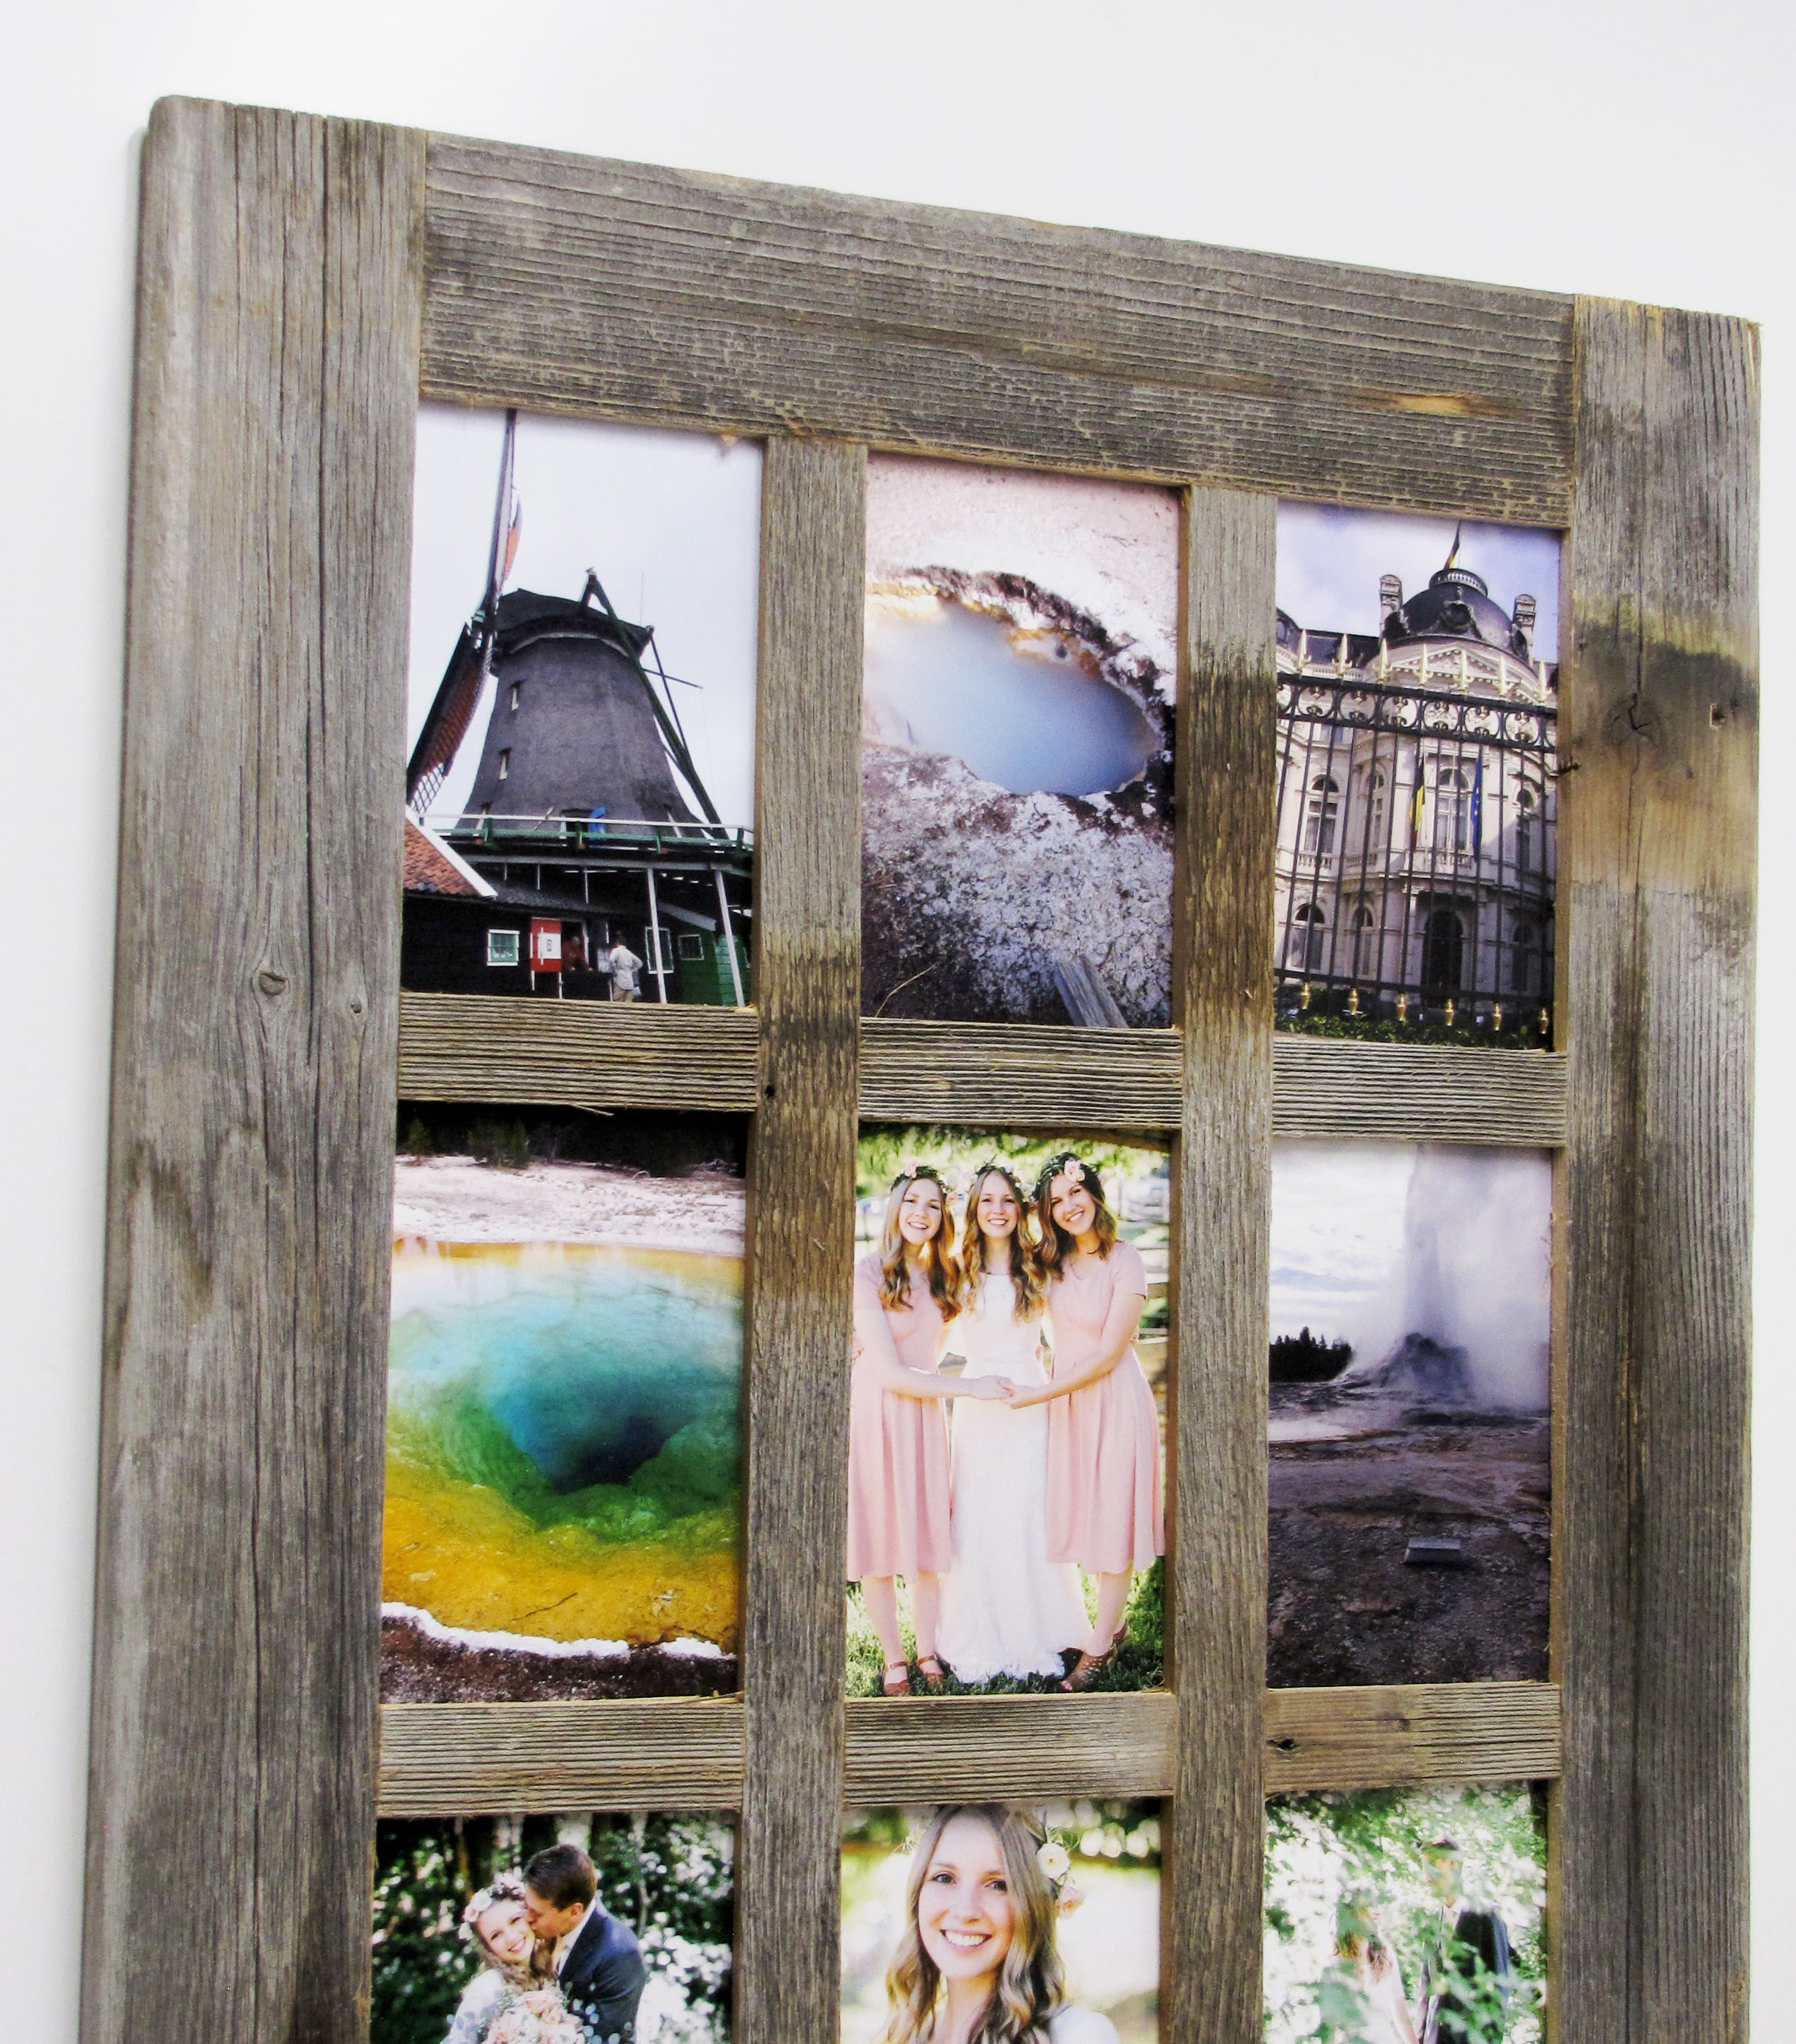 9 Openings 4×6 Window Collage Barn Wood Multi Picture Frame